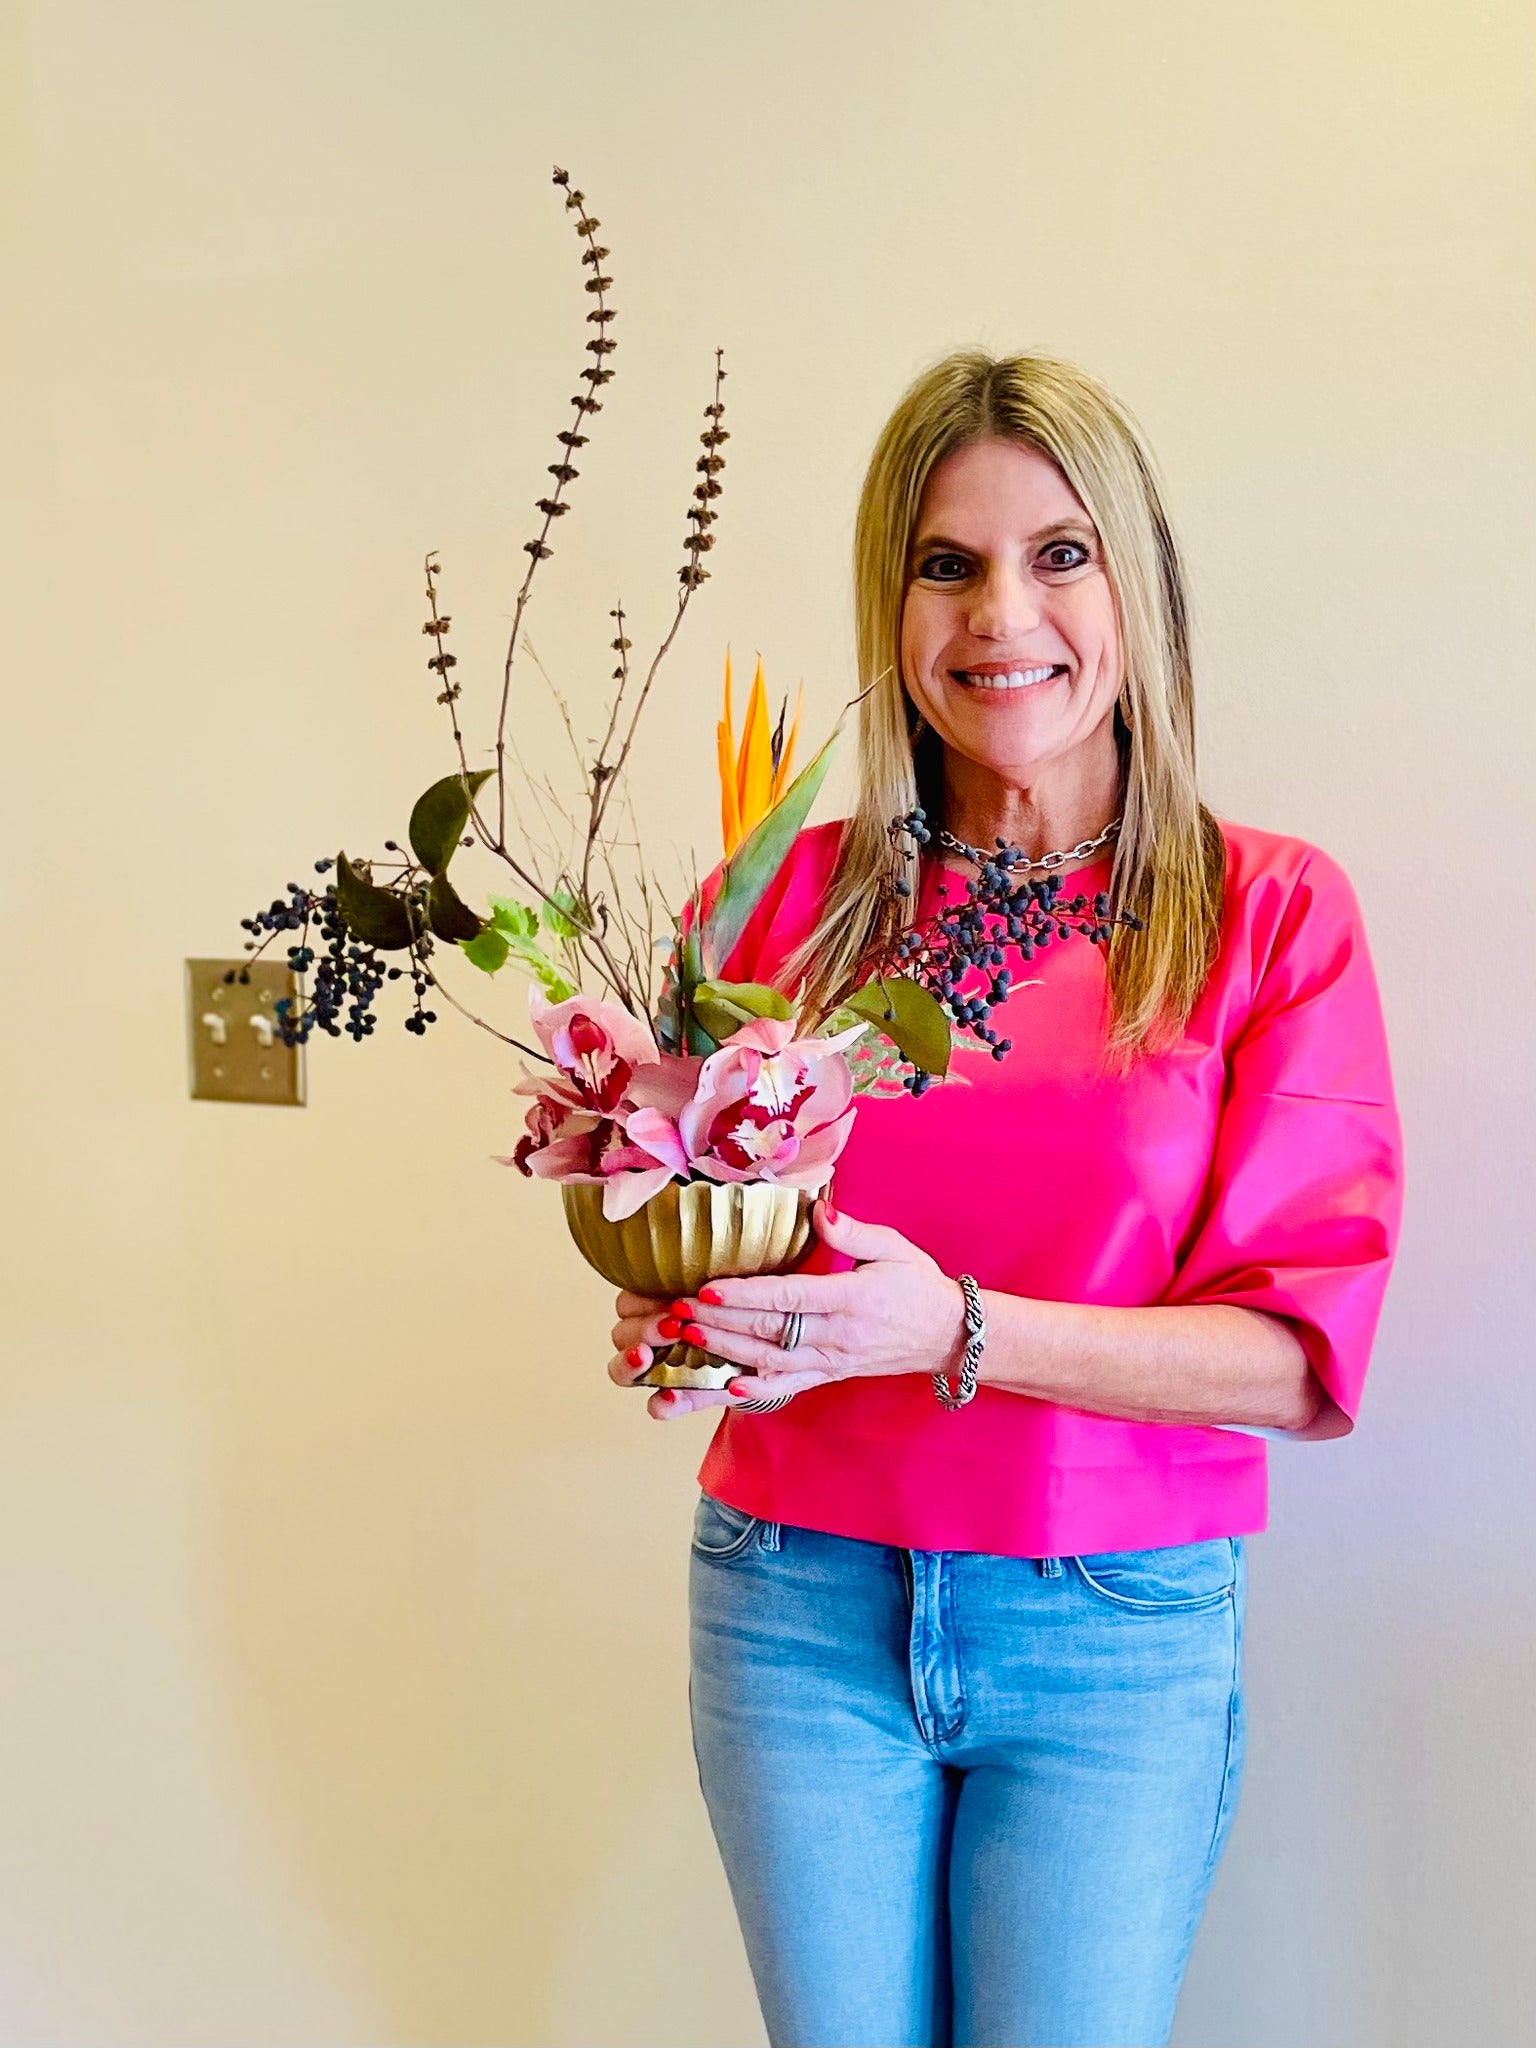 colorful Japanese ikebana style compote with flowers at workshop and woman in pink shirt